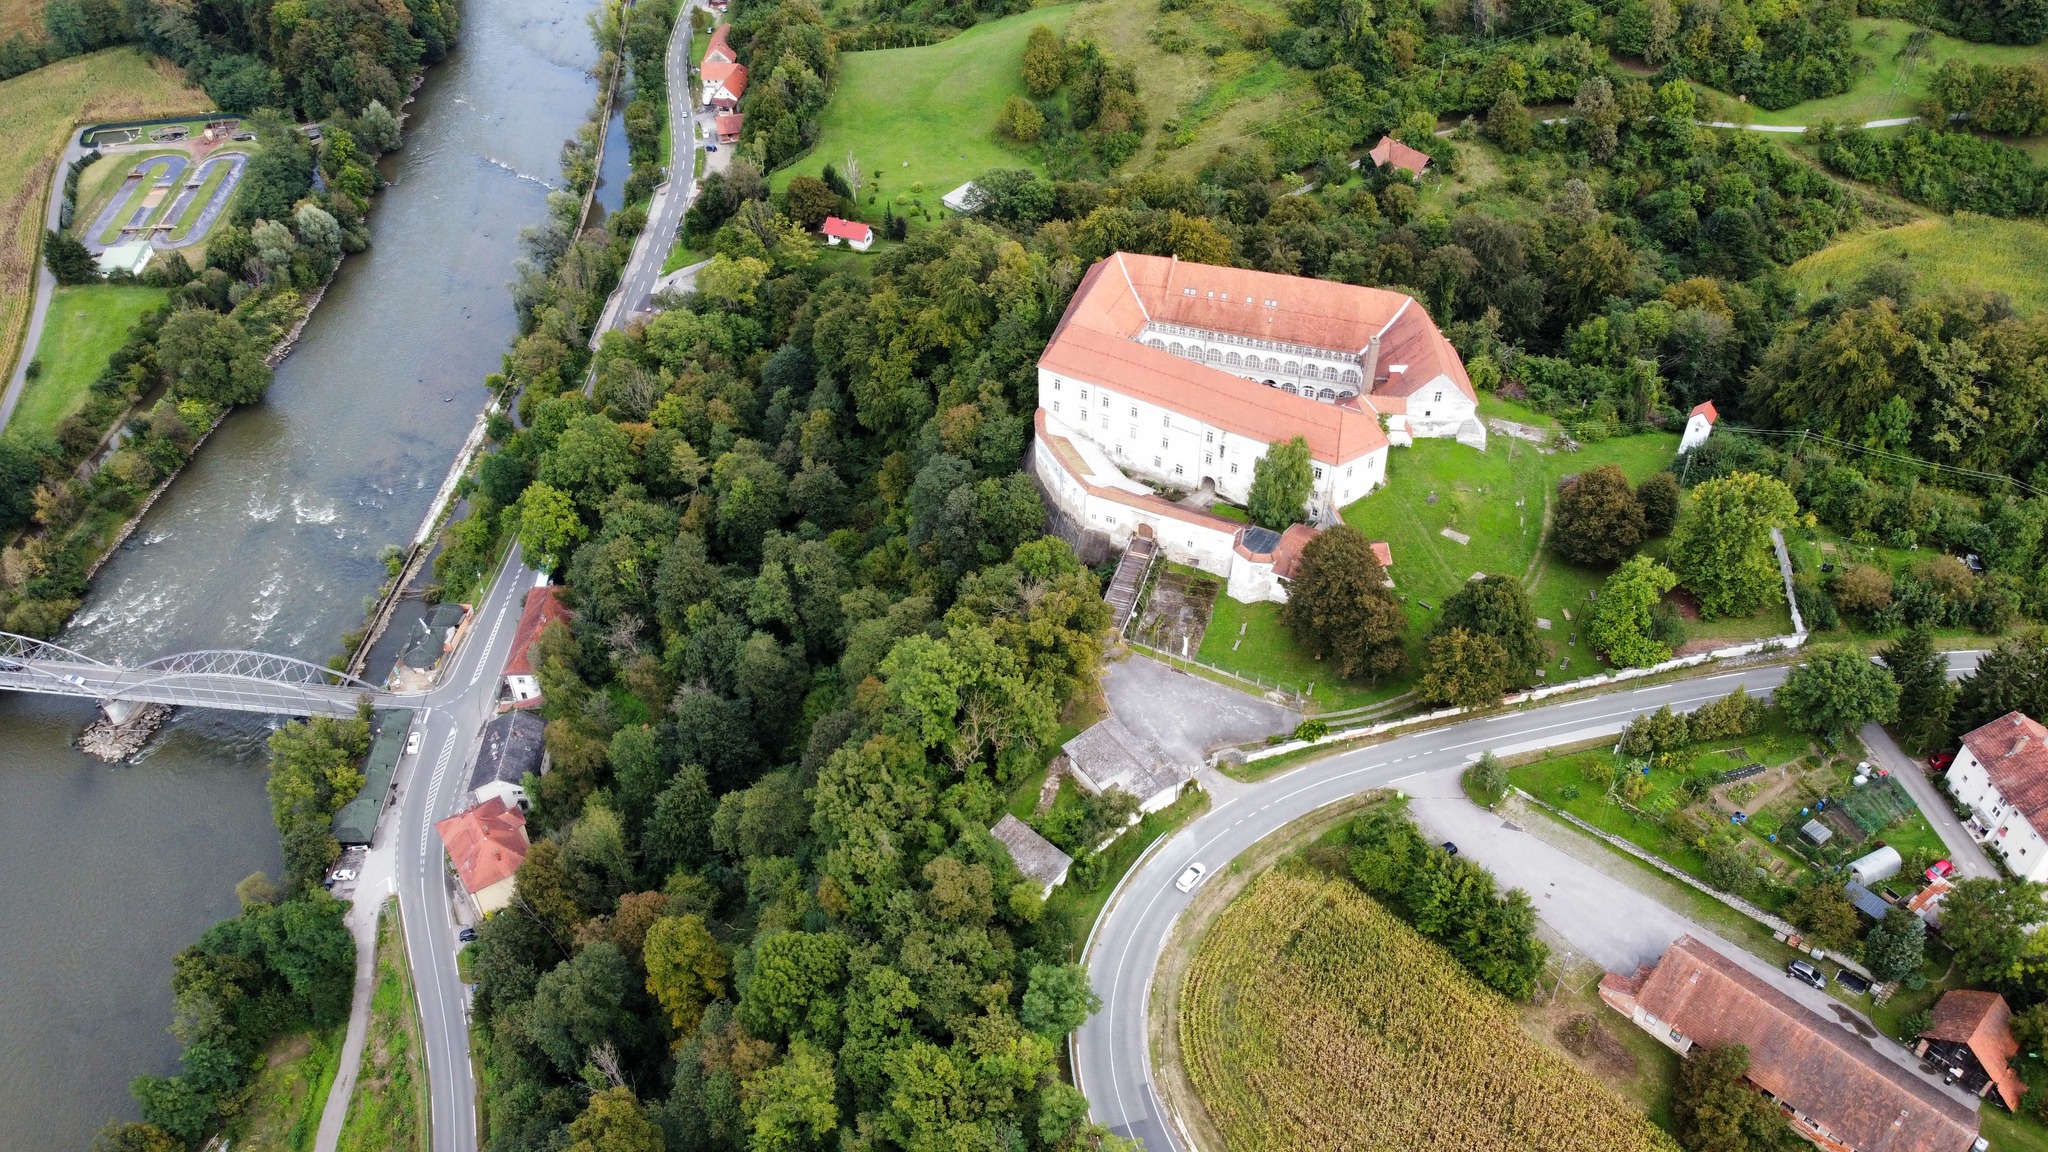 Aerial view of the castle and surroundings